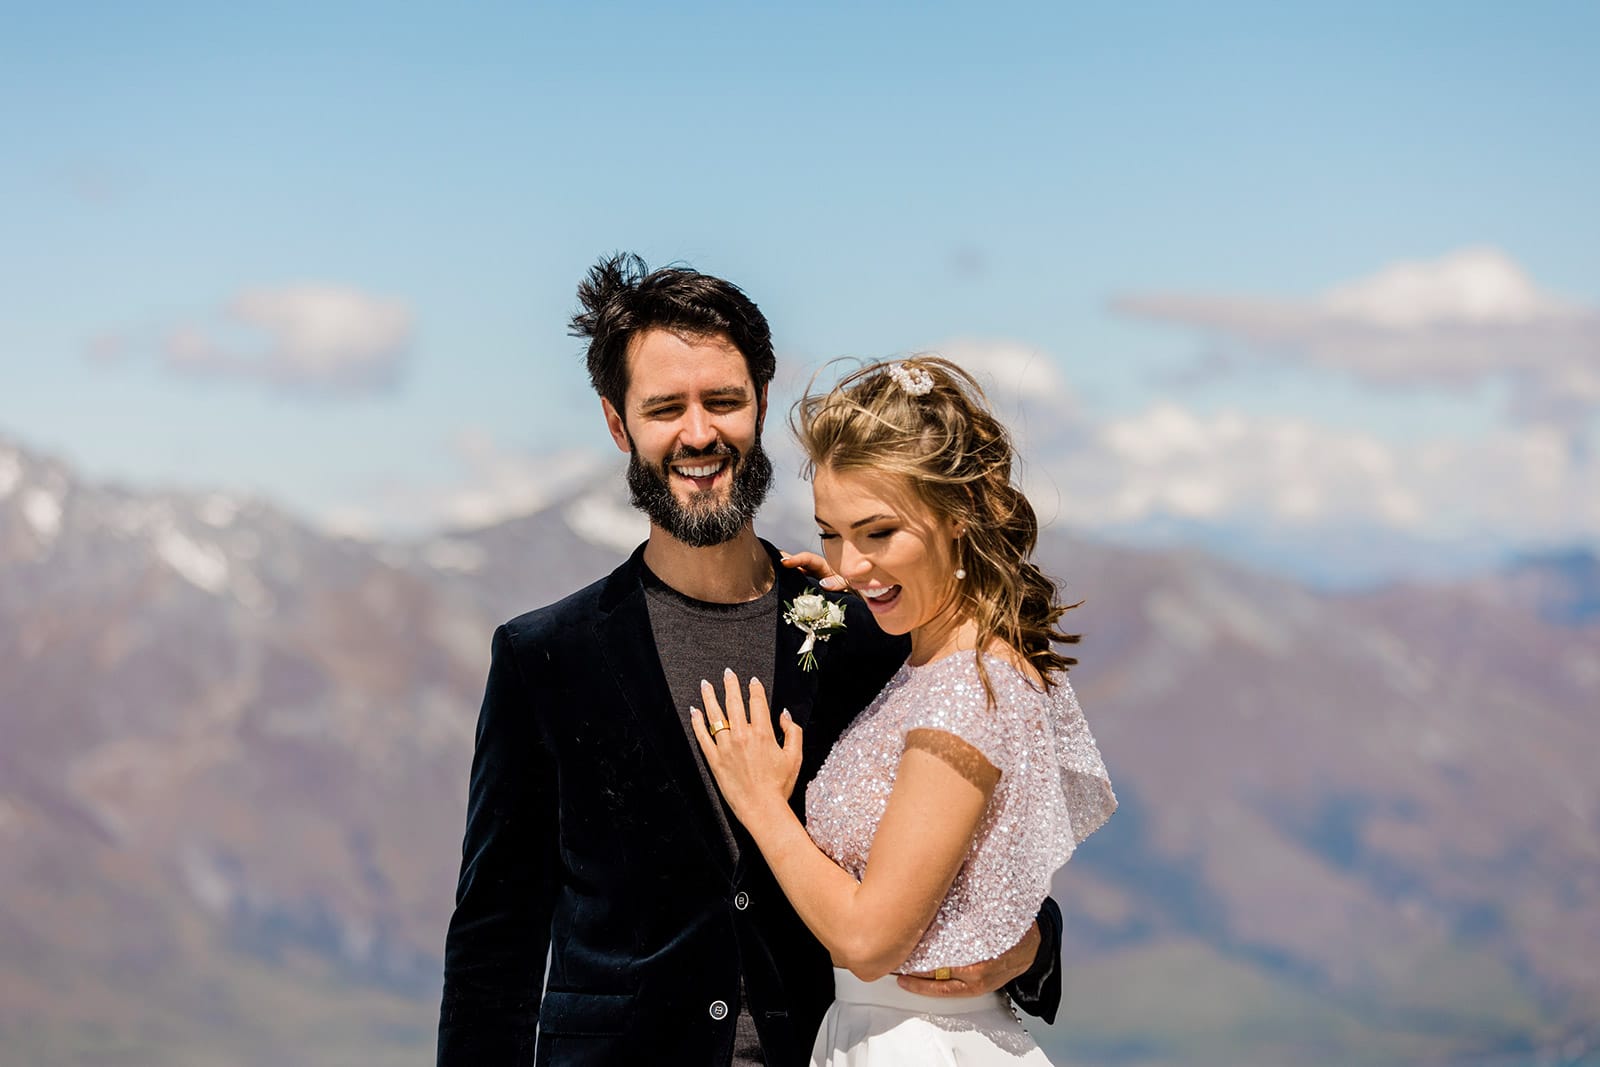 Queenstown Luxury wedding packages with Helicopters